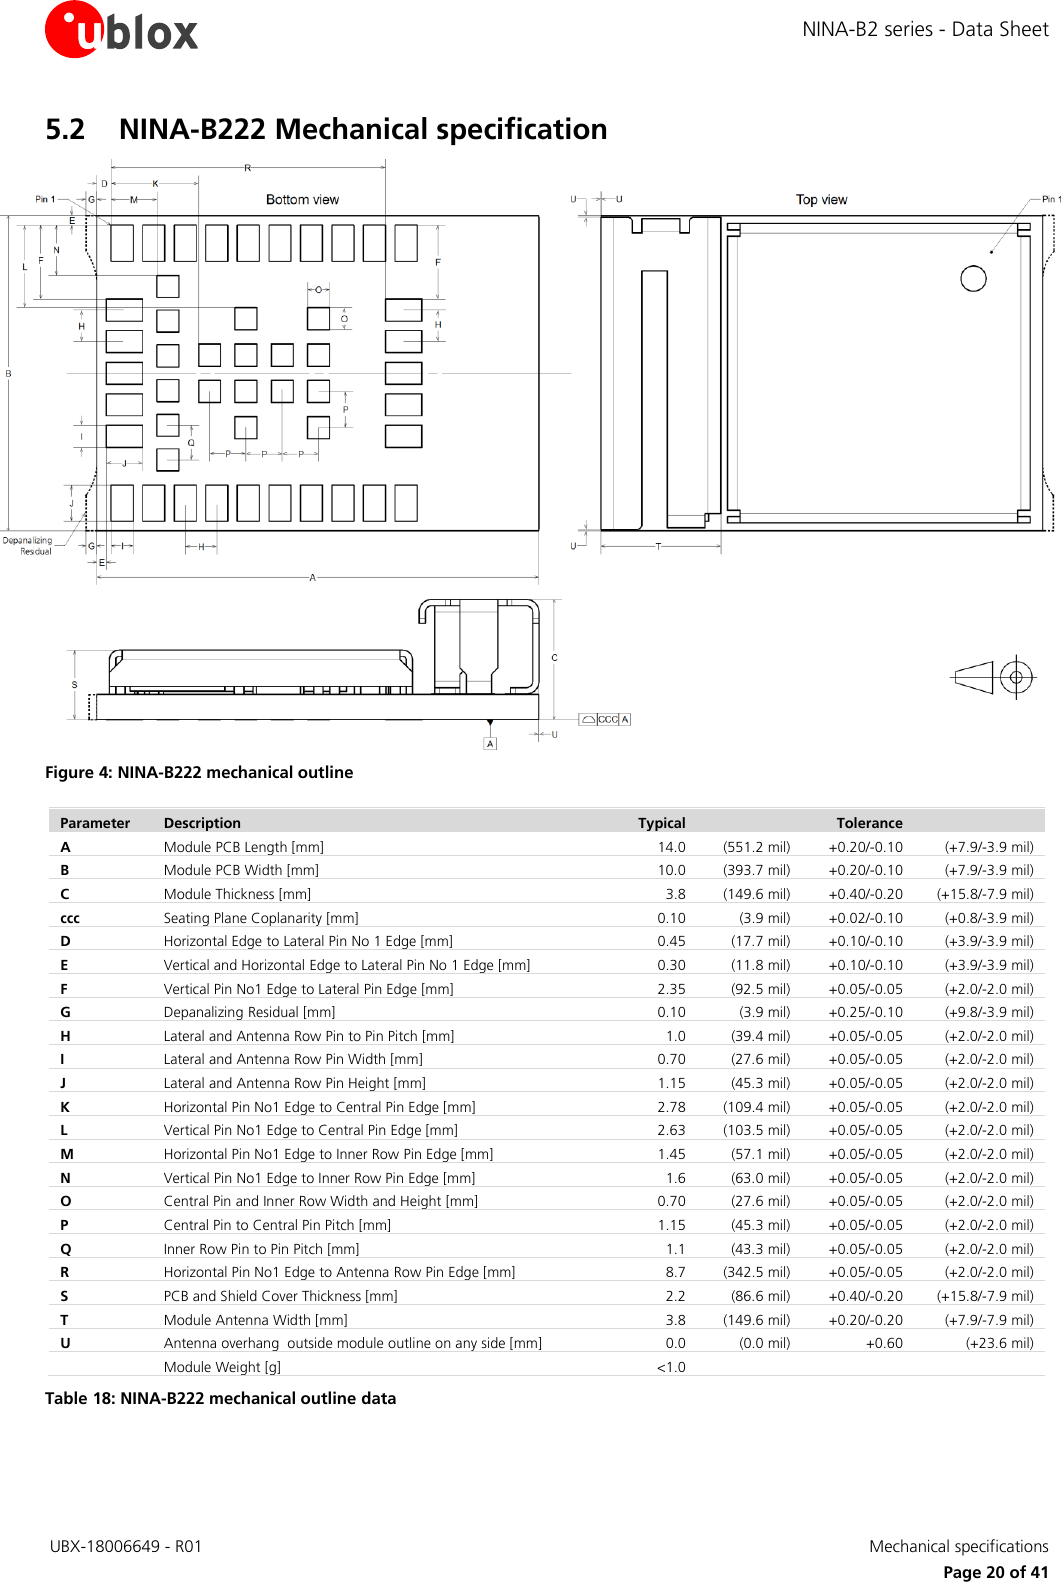 NINA-B2 series - Data Sheet  UBX-18006649 - R01   Mechanical specifications     Page 20 of 41 5.2 NINA-B222 Mechanical specification  Figure 4: NINA-B222 mechanical outline Parameter Description Typical  Tolerance  A  Module PCB Length [mm] 14.0 (551.2 mil) +0.20/-0.10 (+7.9/-3.9 mil) B Module PCB Width [mm] 10.0 (393.7 mil) +0.20/-0.10 (+7.9/-3.9 mil) C Module Thickness [mm] 3.8 (149.6 mil) +0.40/-0.20 (+15.8/-7.9 mil) ccc Seating Plane Coplanarity [mm] 0.10 (3.9 mil) +0.02/-0.10 (+0.8/-3.9 mil) D Horizontal Edge to Lateral Pin No 1 Edge [mm] 0.45 (17.7 mil) +0.10/-0.10 (+3.9/-3.9 mil) E Vertical and Horizontal Edge to Lateral Pin No 1 Edge [mm] 0.30 (11.8 mil) +0.10/-0.10 (+3.9/-3.9 mil) F Vertical Pin No1 Edge to Lateral Pin Edge [mm] 2.35 (92.5 mil) +0.05/-0.05 (+2.0/-2.0 mil) G Depanalizing Residual [mm] 0.10 (3.9 mil) +0.25/-0.10 (+9.8/-3.9 mil) H Lateral and Antenna Row Pin to Pin Pitch [mm] 1.0 (39.4 mil) +0.05/-0.05 (+2.0/-2.0 mil) I Lateral and Antenna Row Pin Width [mm] 0.70 (27.6 mil) +0.05/-0.05 (+2.0/-2.0 mil) J Lateral and Antenna Row Pin Height [mm] 1.15 (45.3 mil) +0.05/-0.05 (+2.0/-2.0 mil) K Horizontal Pin No1 Edge to Central Pin Edge [mm] 2.78 (109.4 mil) +0.05/-0.05 (+2.0/-2.0 mil) L Vertical Pin No1 Edge to Central Pin Edge [mm] 2.63 (103.5 mil) +0.05/-0.05 (+2.0/-2.0 mil) M Horizontal Pin No1 Edge to Inner Row Pin Edge [mm] 1.45 (57.1 mil) +0.05/-0.05 (+2.0/-2.0 mil) N Vertical Pin No1 Edge to Inner Row Pin Edge [mm] 1.6 (63.0 mil) +0.05/-0.05 (+2.0/-2.0 mil) O Central Pin and Inner Row Width and Height [mm] 0.70 (27.6 mil) +0.05/-0.05 (+2.0/-2.0 mil) P Central Pin to Central Pin Pitch [mm] 1.15 (45.3 mil) +0.05/-0.05 (+2.0/-2.0 mil) Q Inner Row Pin to Pin Pitch [mm] 1.1 (43.3 mil) +0.05/-0.05 (+2.0/-2.0 mil) R Horizontal Pin No1 Edge to Antenna Row Pin Edge [mm] 8.7 (342.5 mil) +0.05/-0.05 (+2.0/-2.0 mil) S PCB and Shield Cover Thickness [mm] 2.2 (86.6 mil) +0.40/-0.20 (+15.8/-7.9 mil) T Module Antenna Width [mm] 3.8 (149.6 mil) +0.20/-0.20 (+7.9/-7.9 mil) U Antenna overhang  outside module outline on any side [mm] 0.0 (0.0 mil) +0.60 (+23.6 mil)  Module Weight [g] &lt;1.0    Table 18: NINA-B222 mechanical outline data 